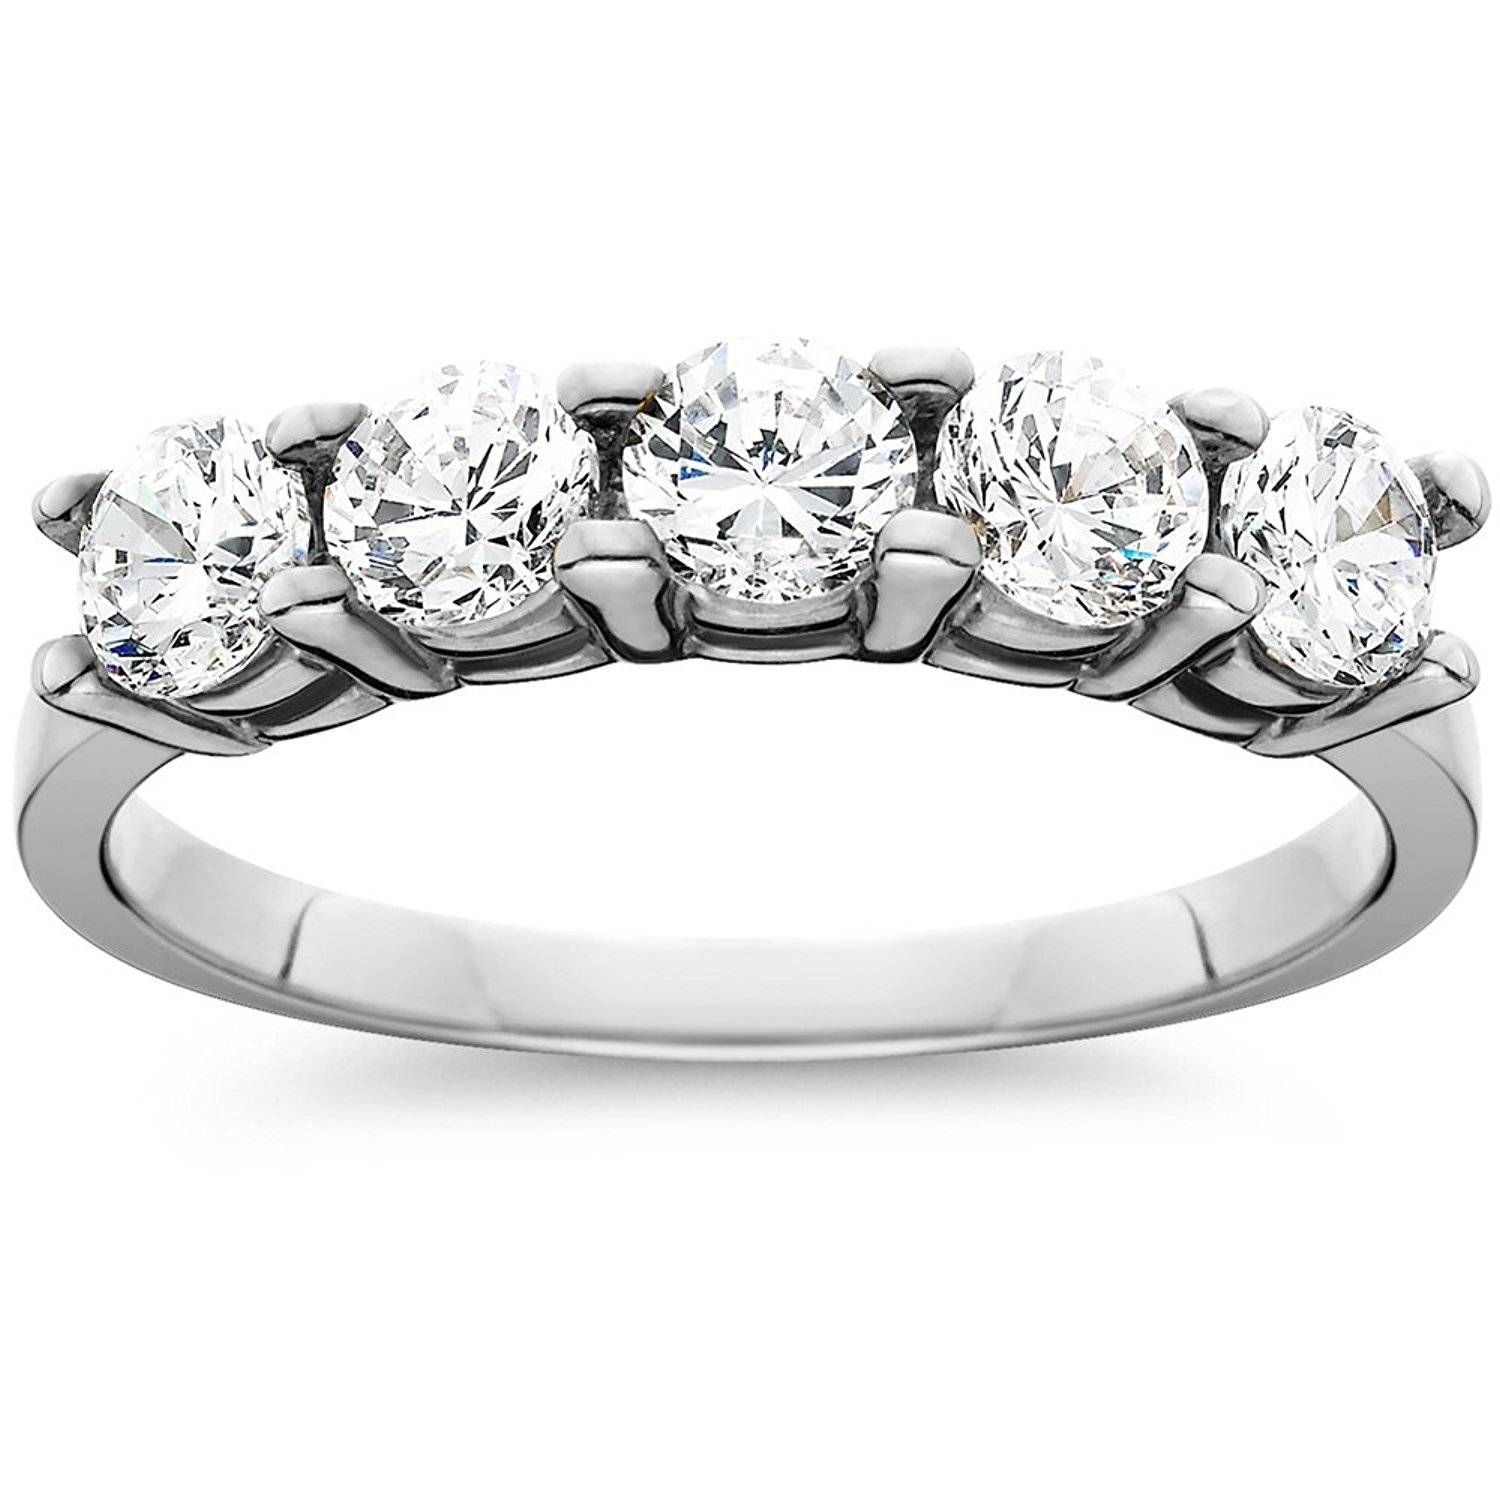 Wedding Rings : Costco Jewelry Coupon 3 Stone Diamond Anniversary Throughout Most Recently Released Three Stone Diamond Anniversary Rings (View 15 of 25)